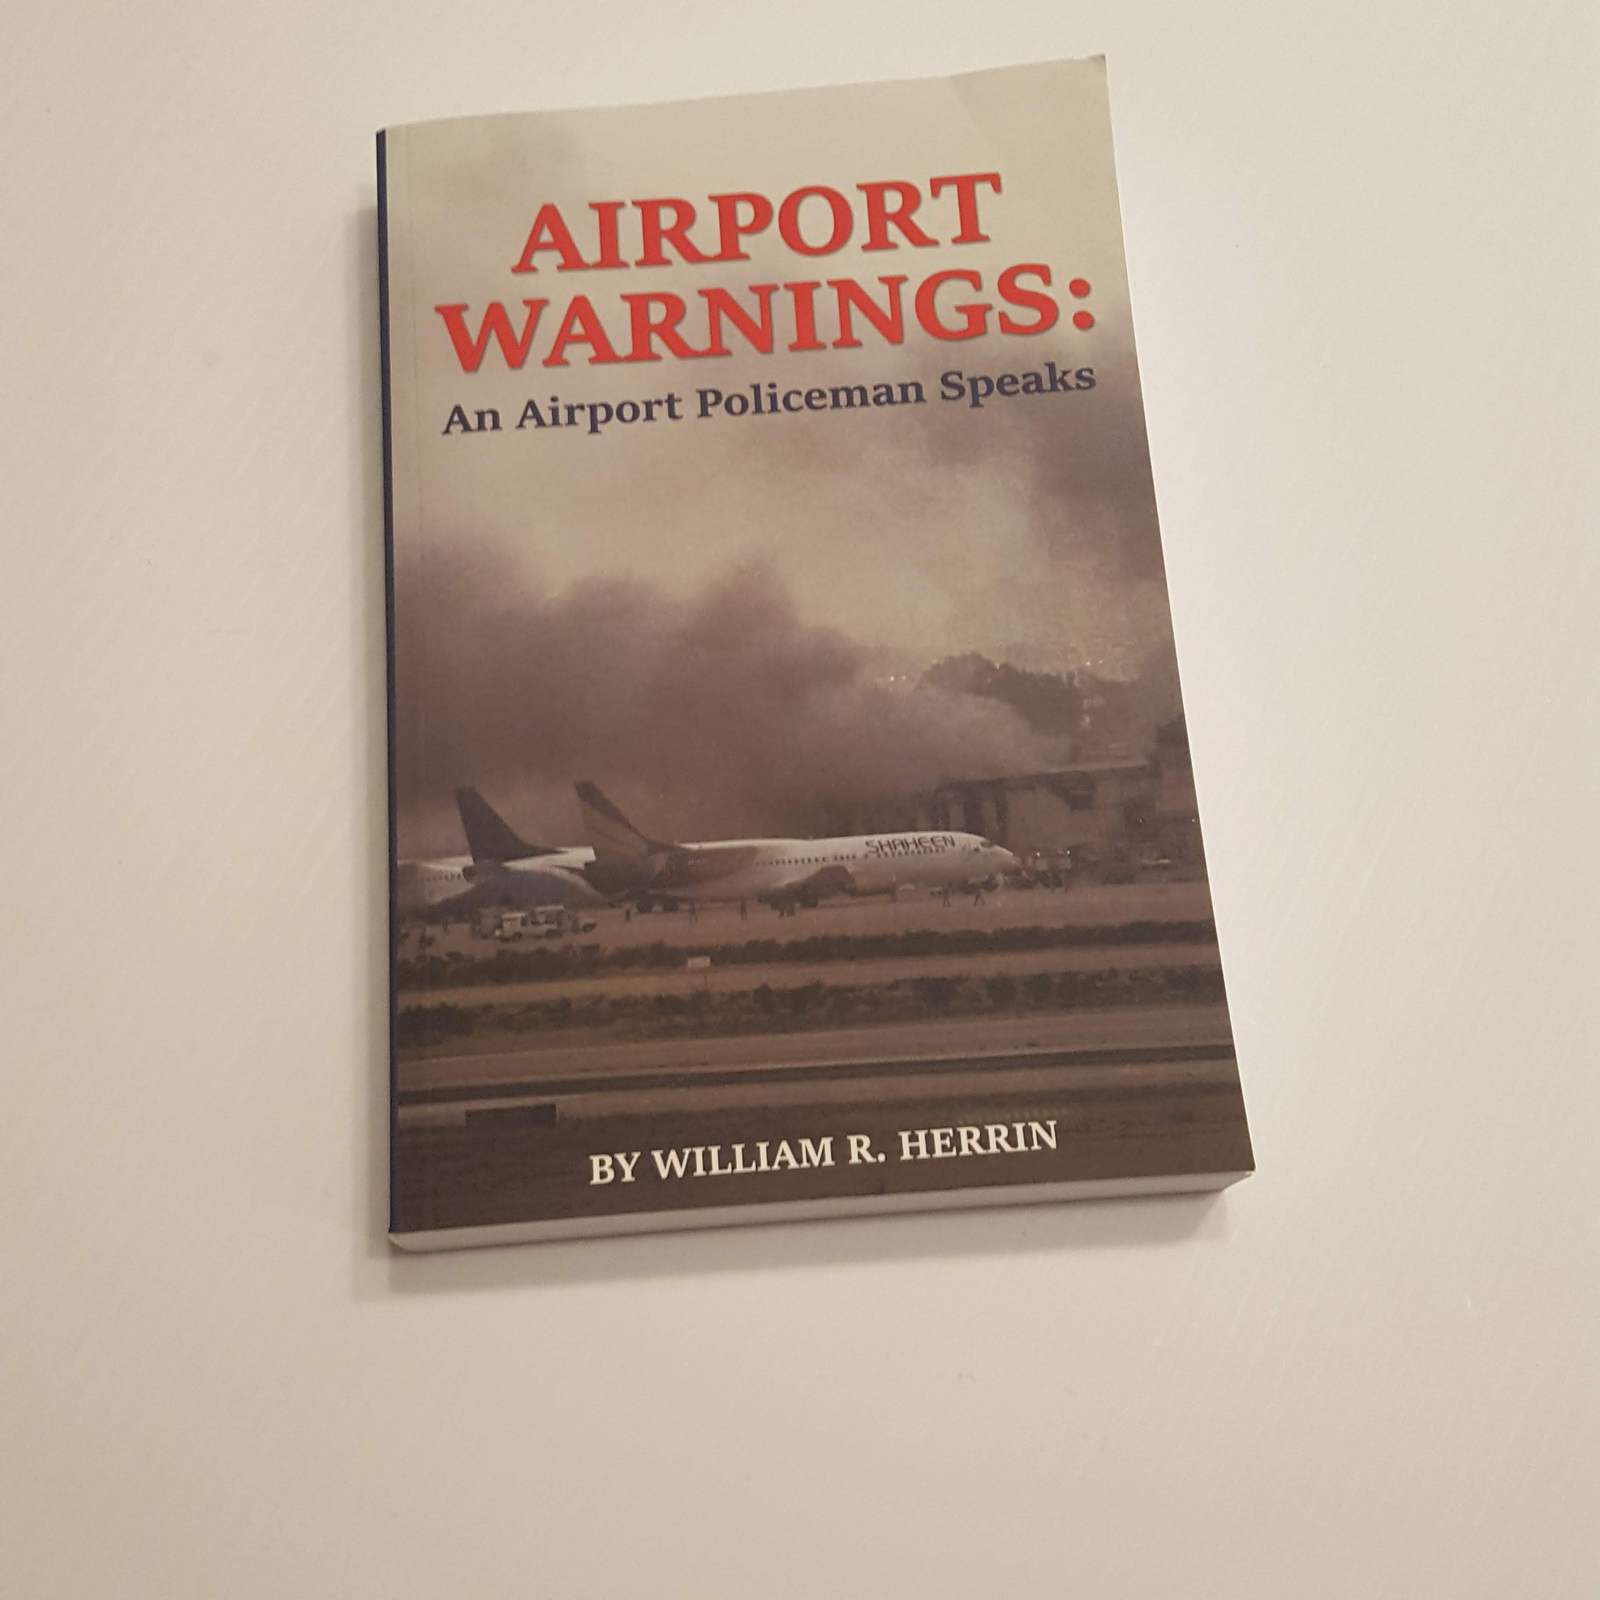 Primary image for Airport Warnings An Airport Policeman Speaks  by William R. Herrin. Paperback